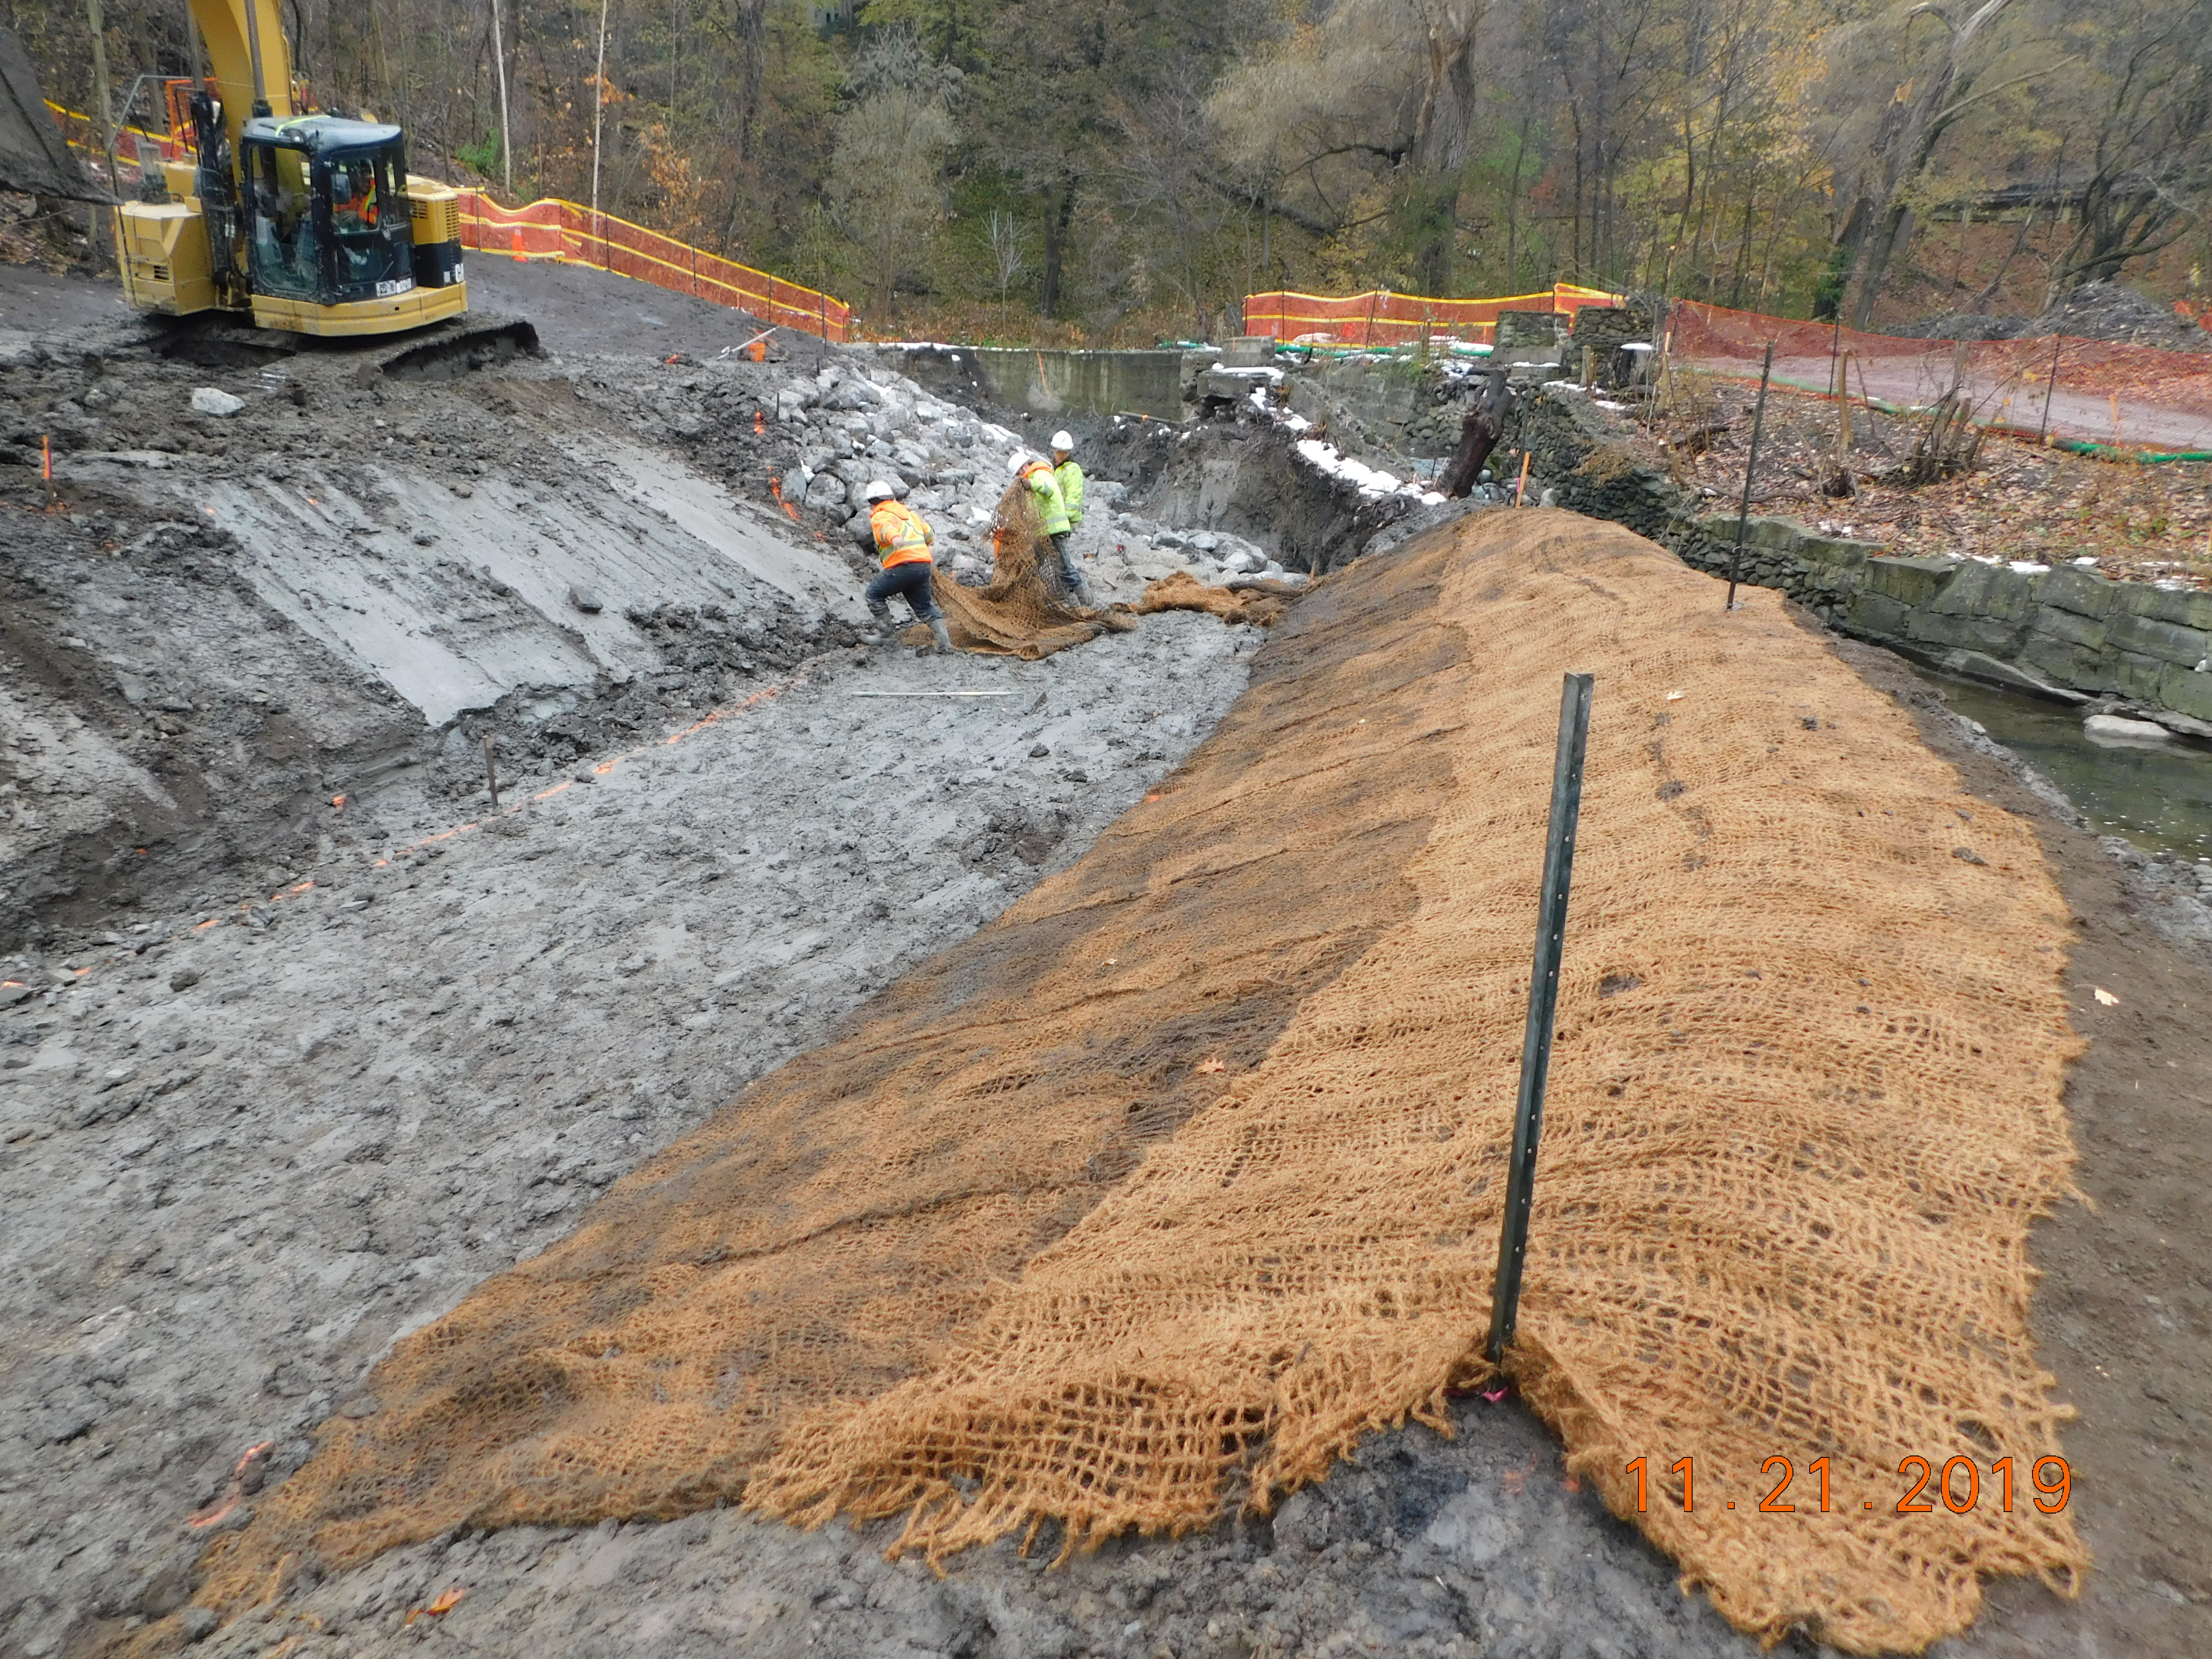 TRCA construction staff can been seen installing an erosion control blanket along the banks of the newly excavated Yellow Creek channel. Source: TRCA, 2019.